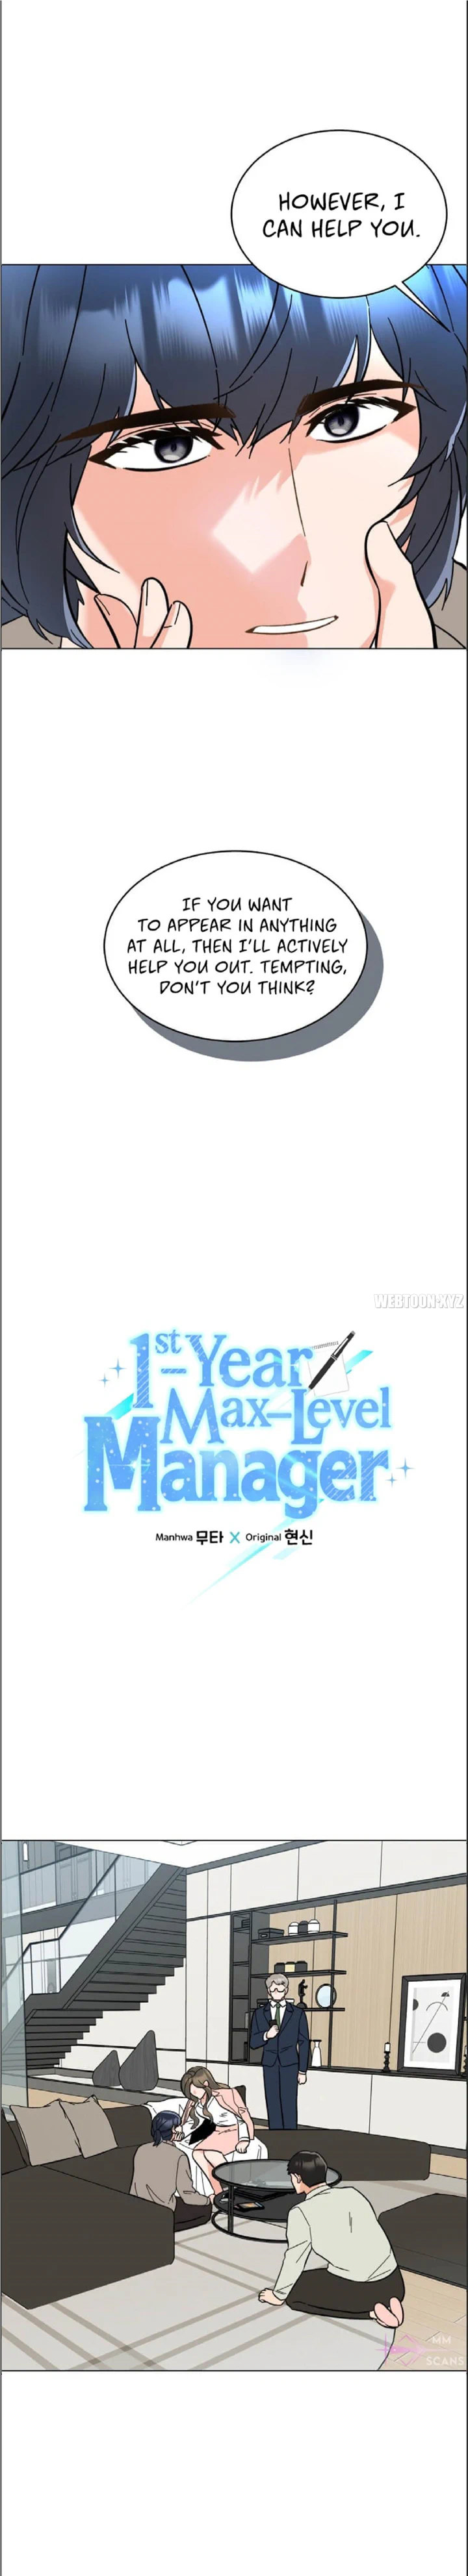 1st year Max Level Manager - Chapter 108 Page 6